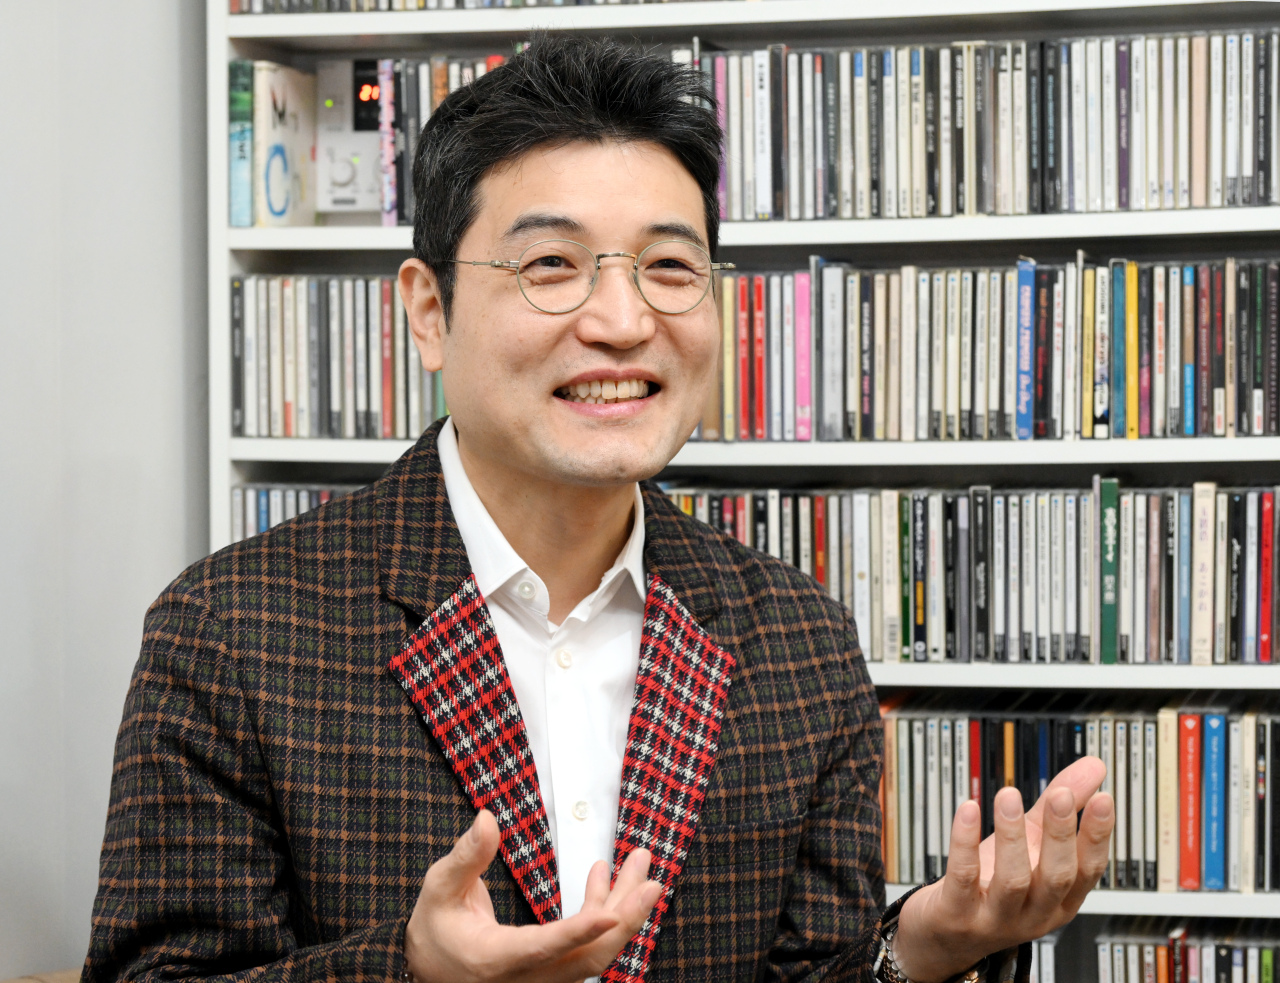 Jeong Chang-hwan, chief executive officer n.CH Entertainment, poses for photos during an interview with The Korea Herald at the entertainment firm’s headquarters in southern Seoul. (Park Hyun-koo/The Korea Herald)